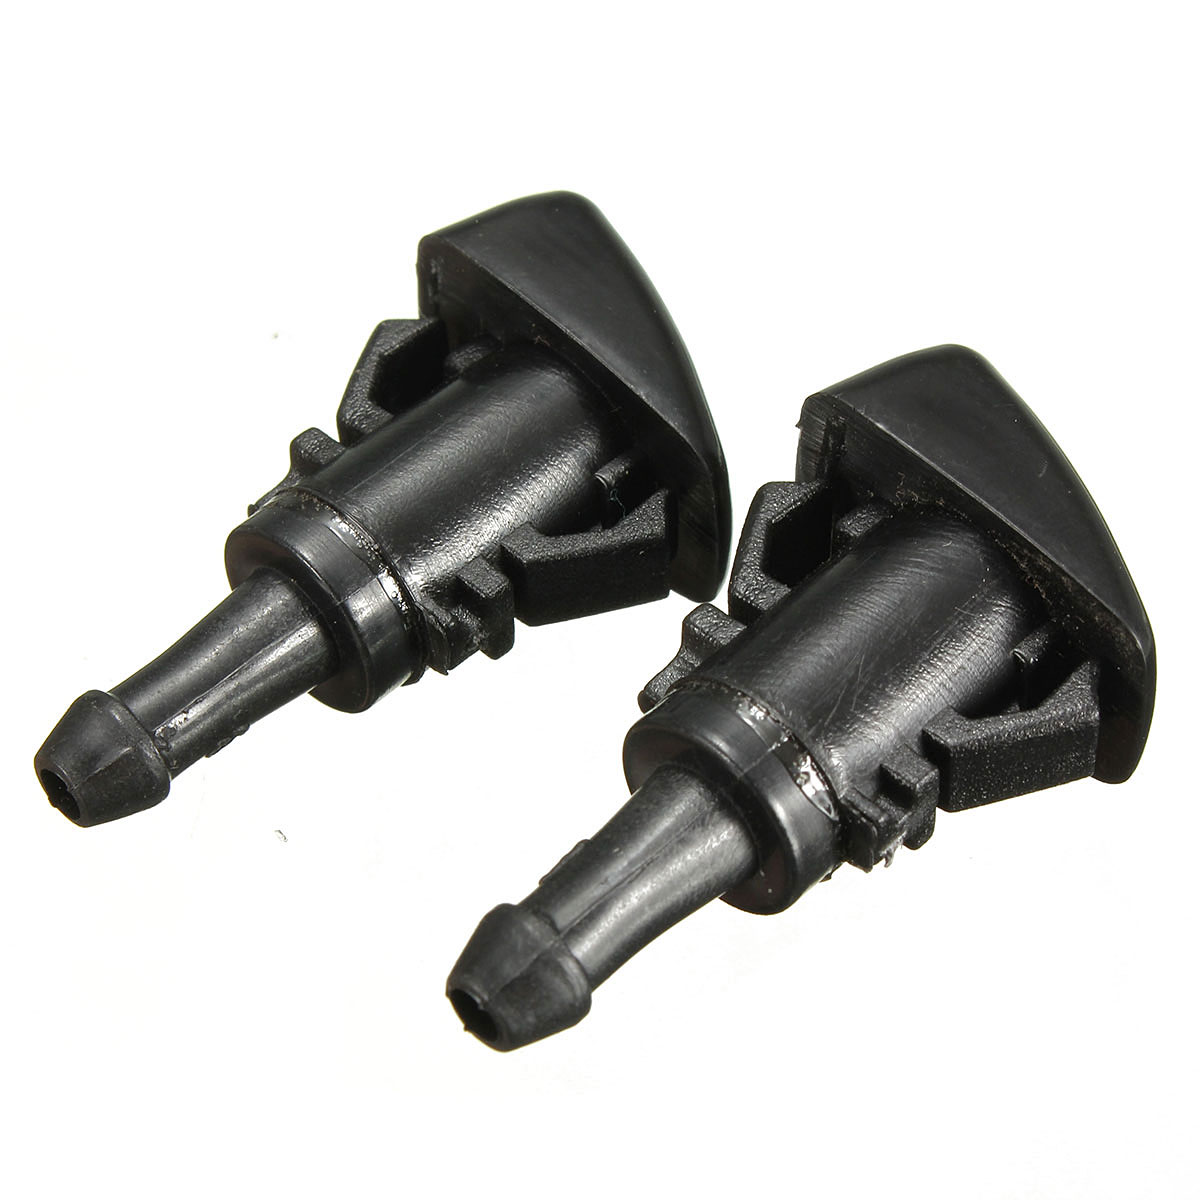 New 2x Windshield Water Sprayer Washer Nozzle For Chrysler 300 for Dodge Charger Magnum